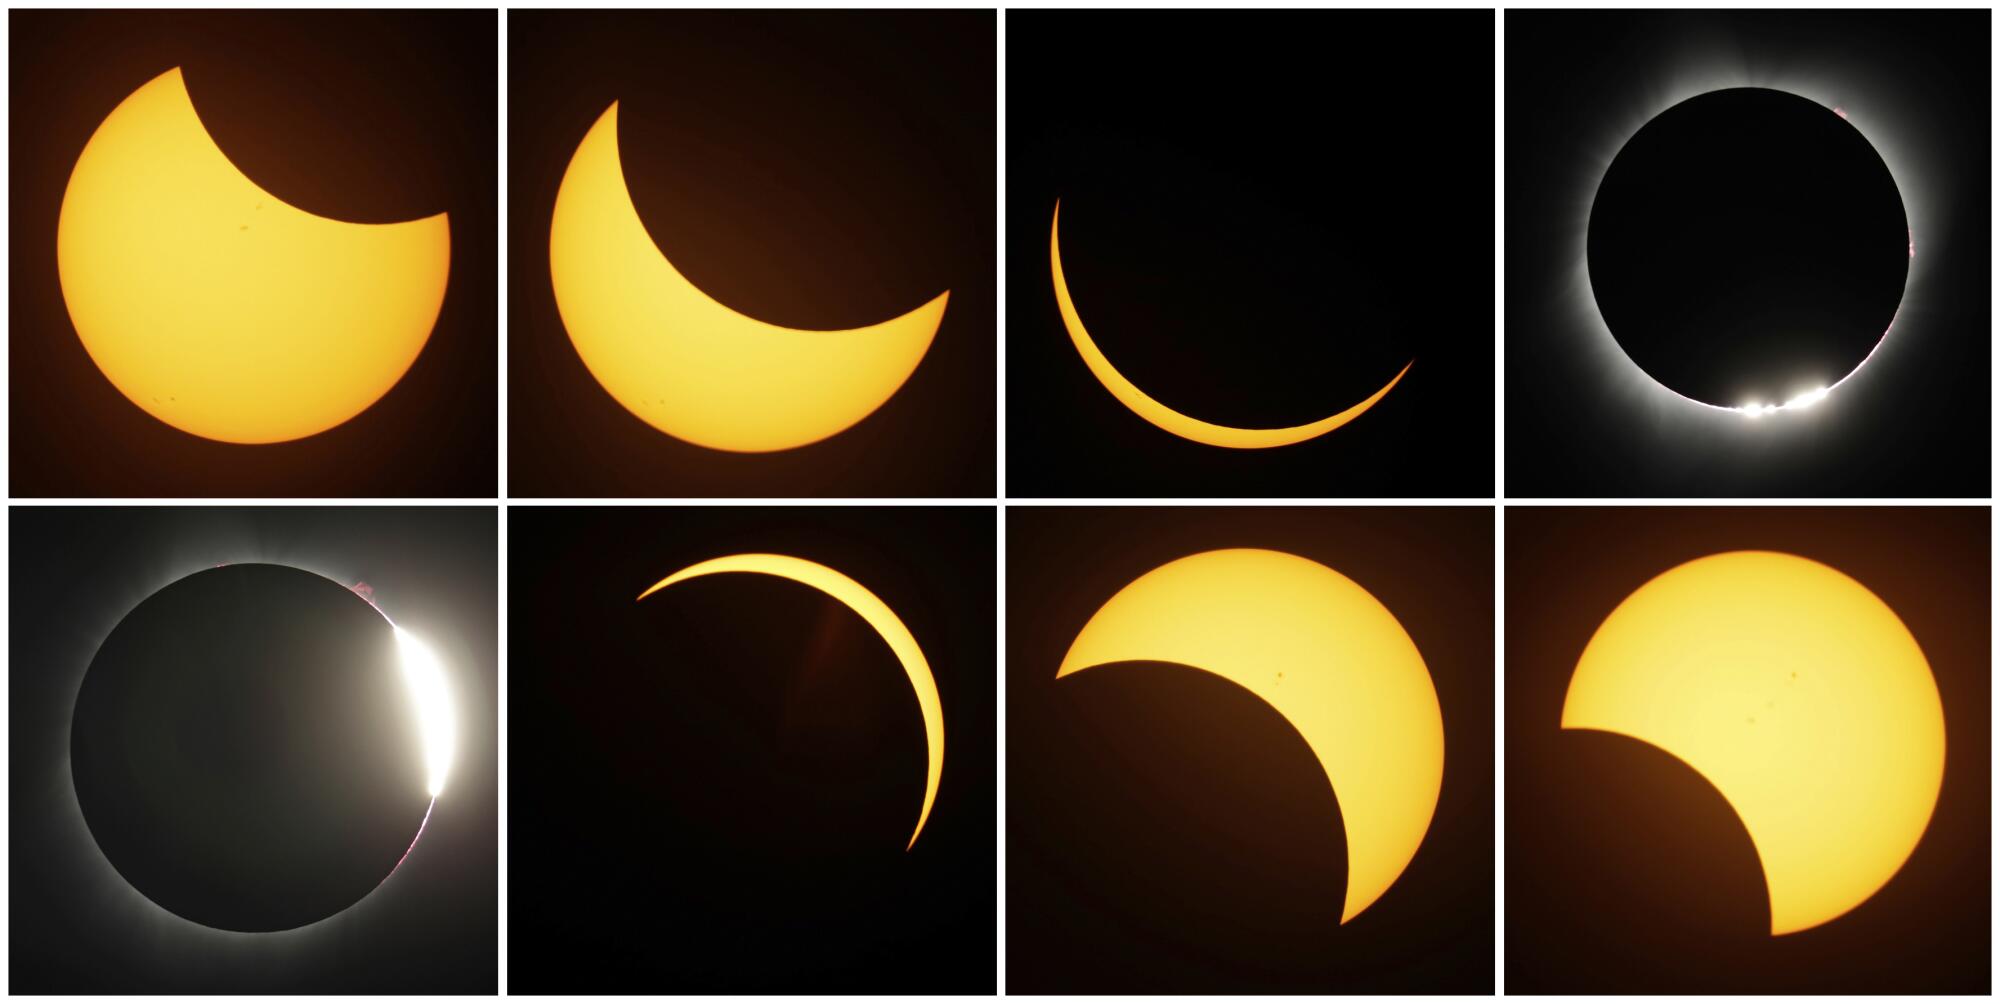 Eight photos in two rows show the phases of a total eclipse